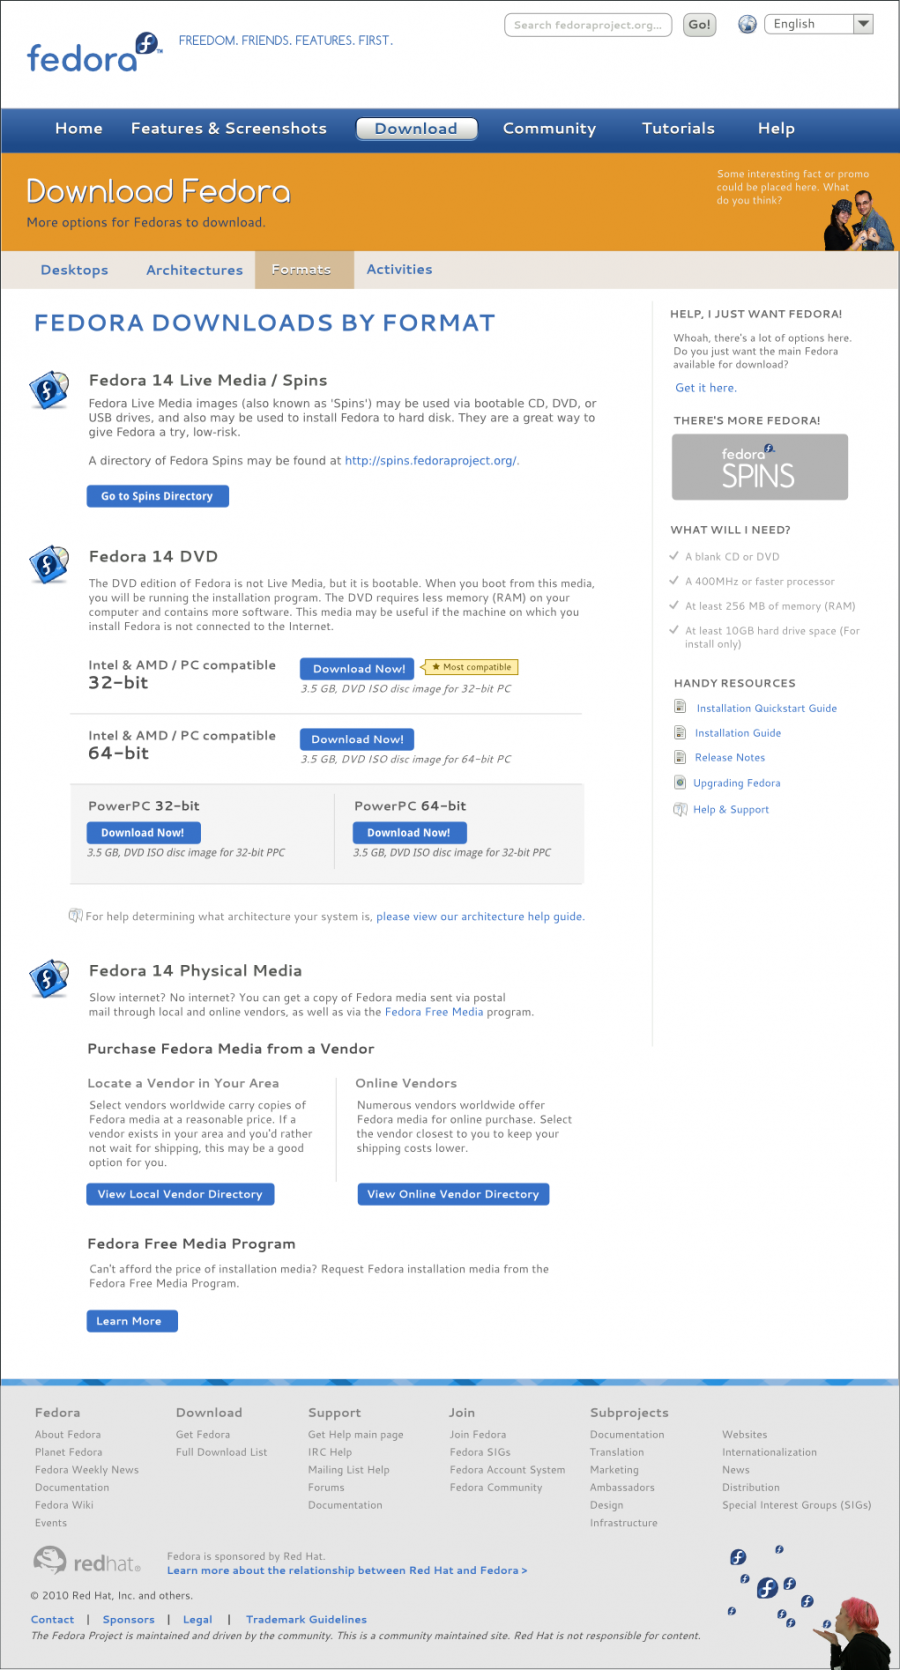 Wwwfpo-redesign-2010 4-download-tab.png